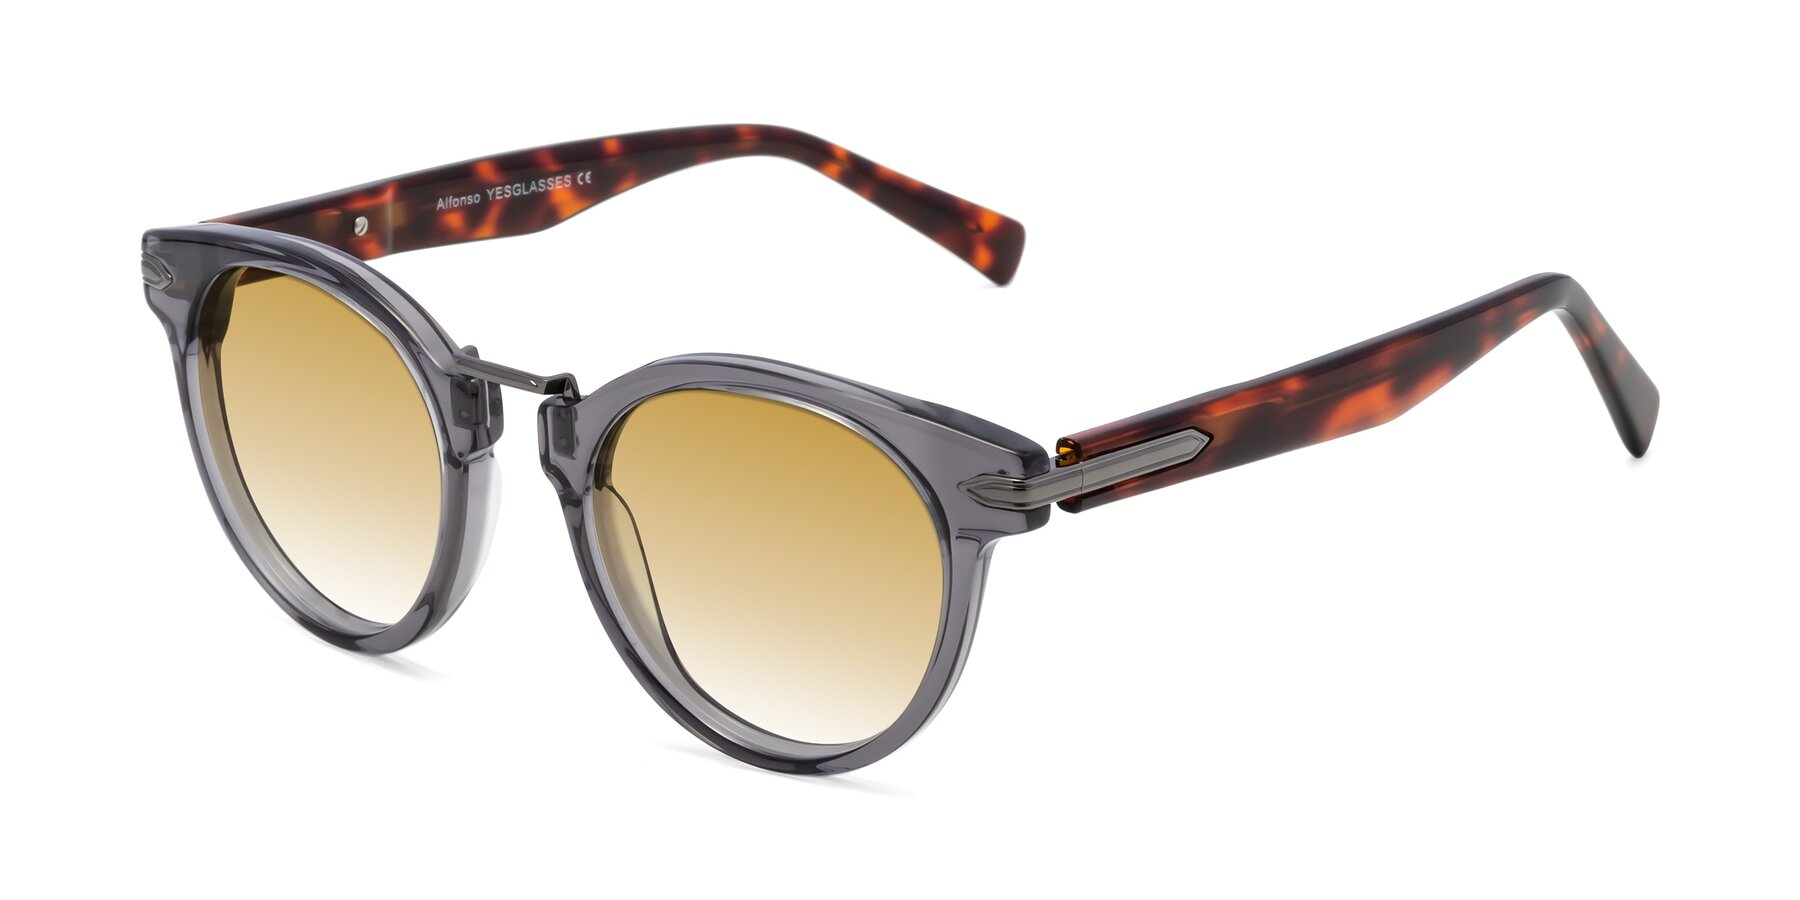 Angle of Alfonso in Gray /Tortoise with Champagne Gradient Lenses